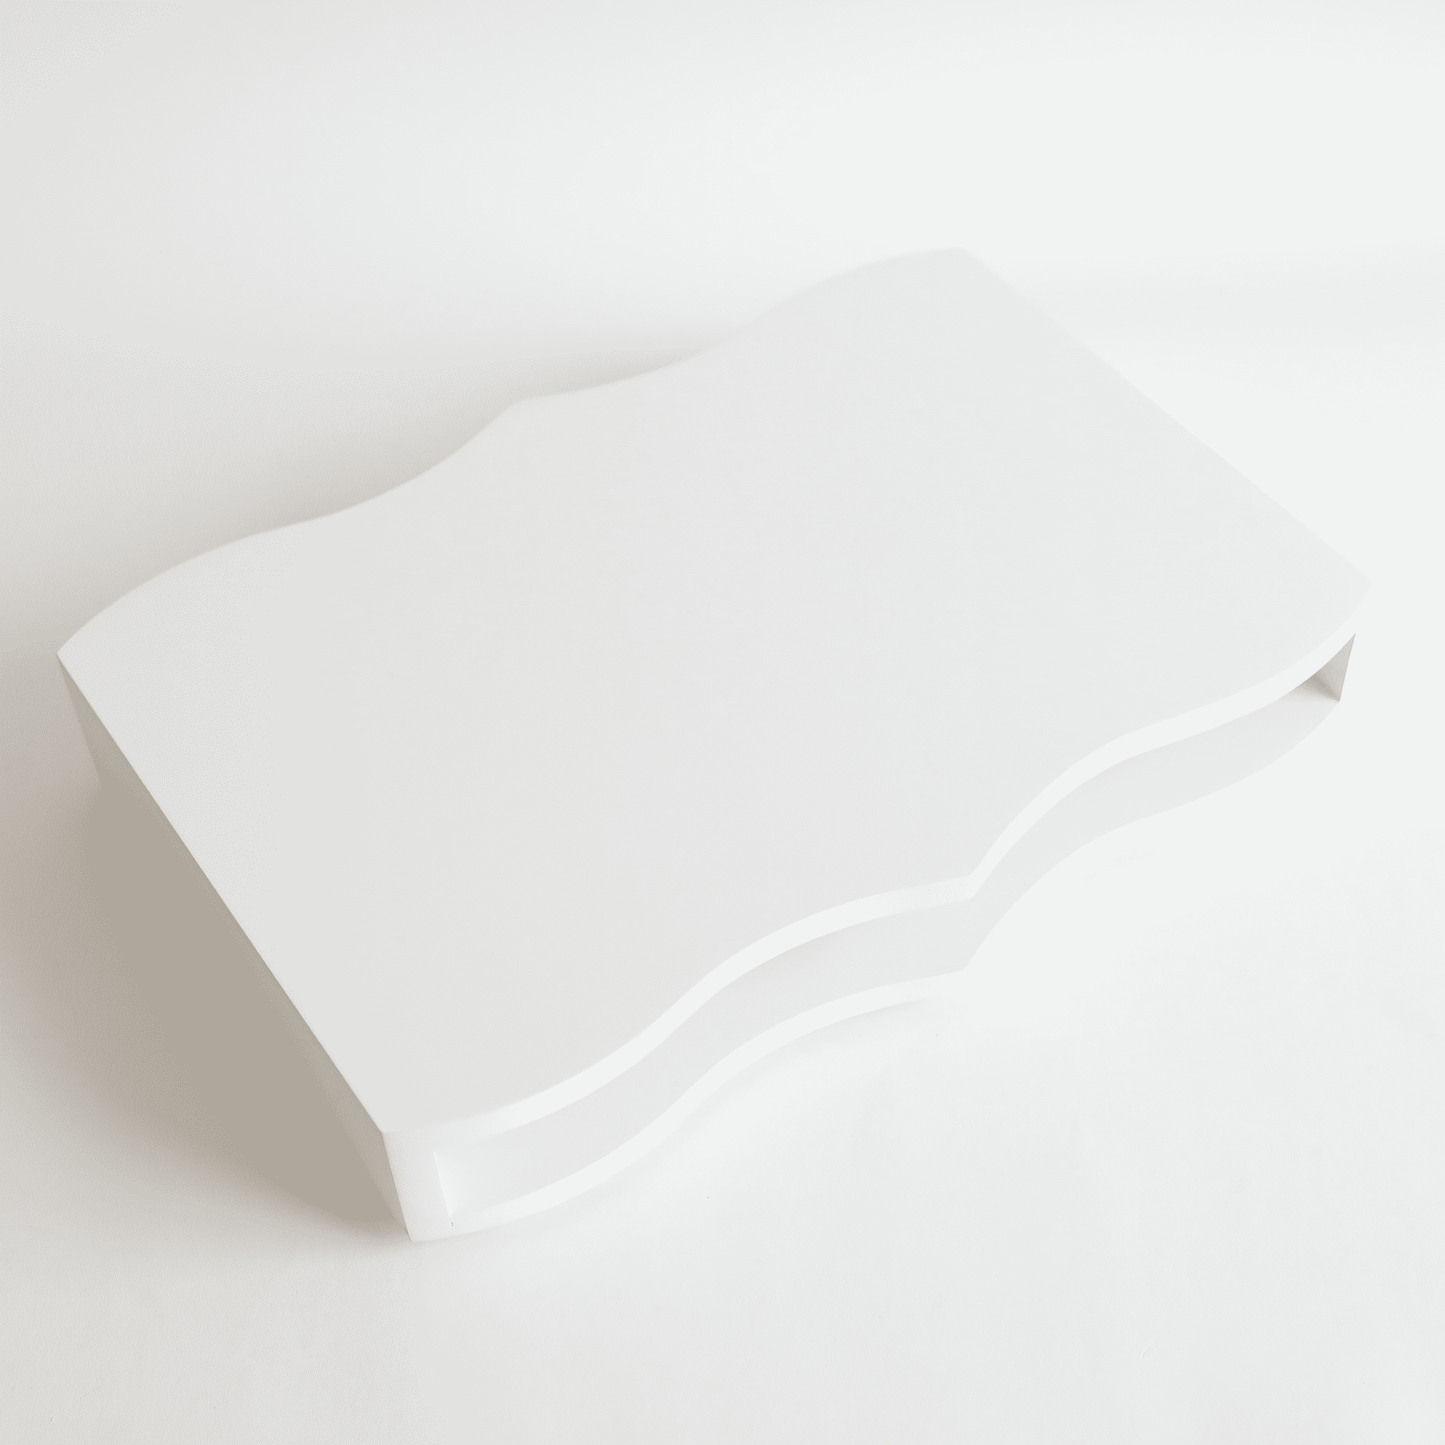 a piece of white paper sitting on top of a table.